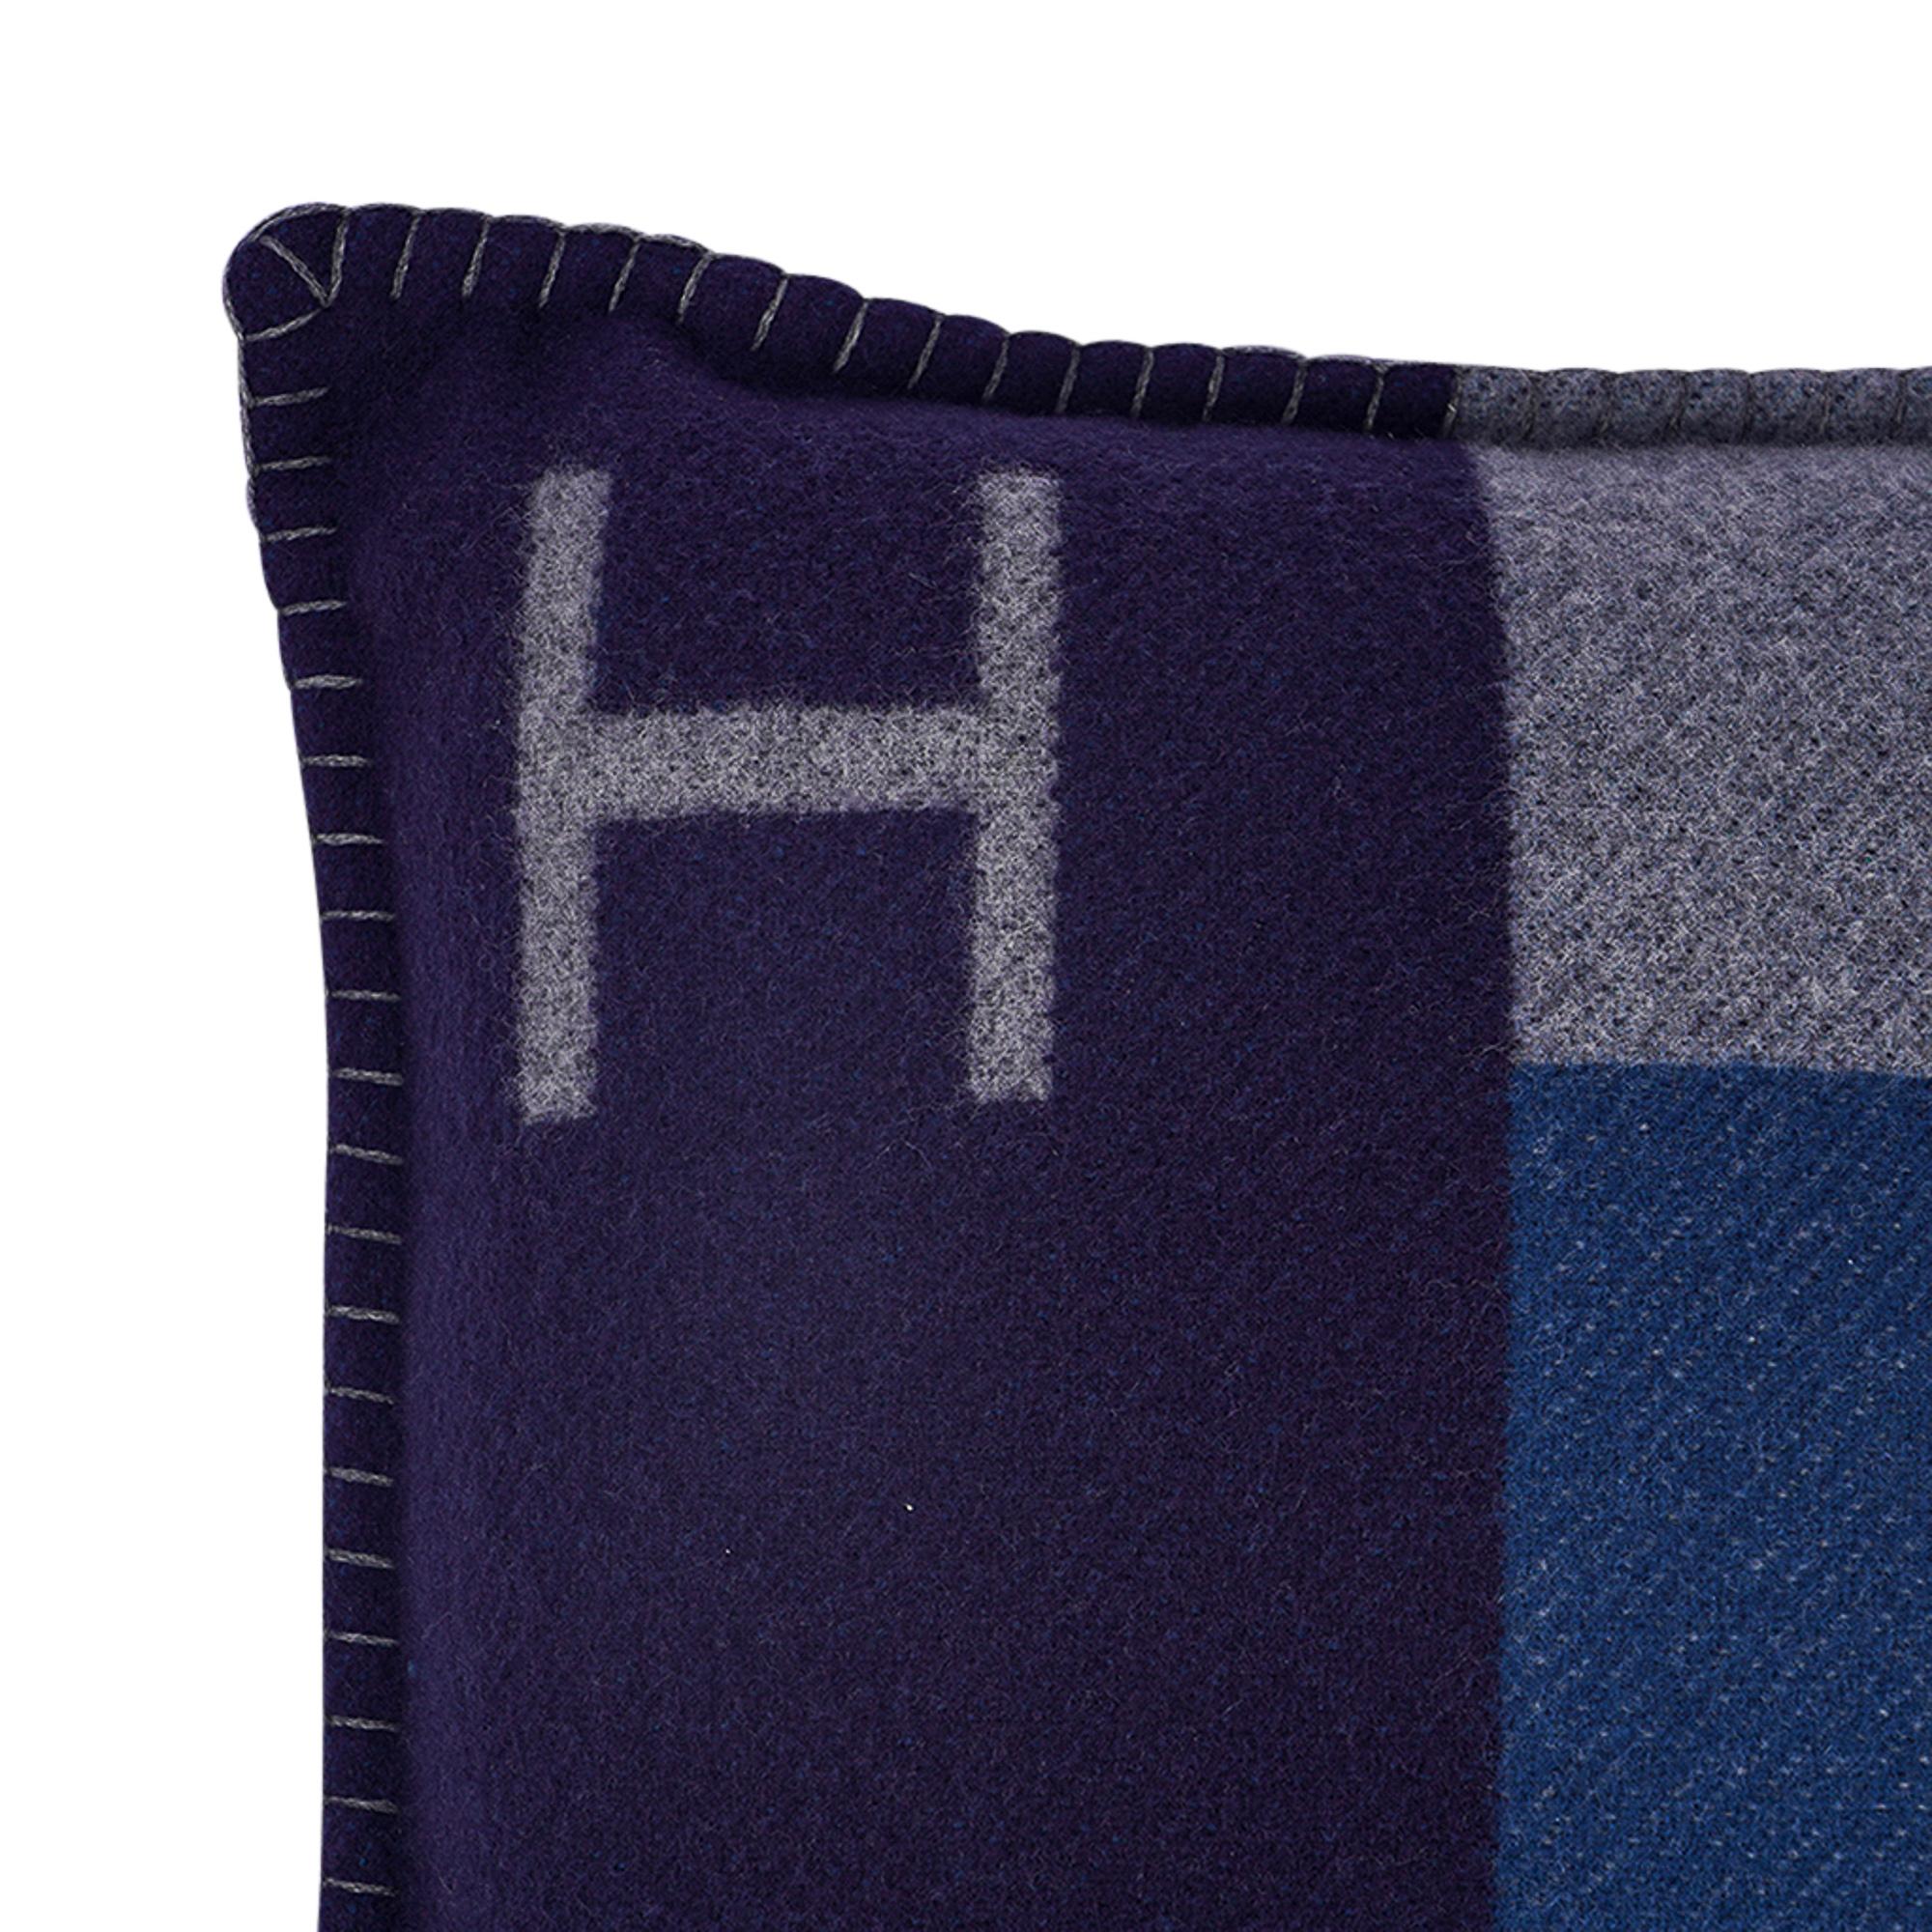 Mightychic offers an Hermes Casaque H Pillow featured in Marine and Acier.
A modern expression of the classic H pillow inspired by the horse racing world.
Originally featured on silk jerseys these prints are created for the home.
Hidden zip.
90%